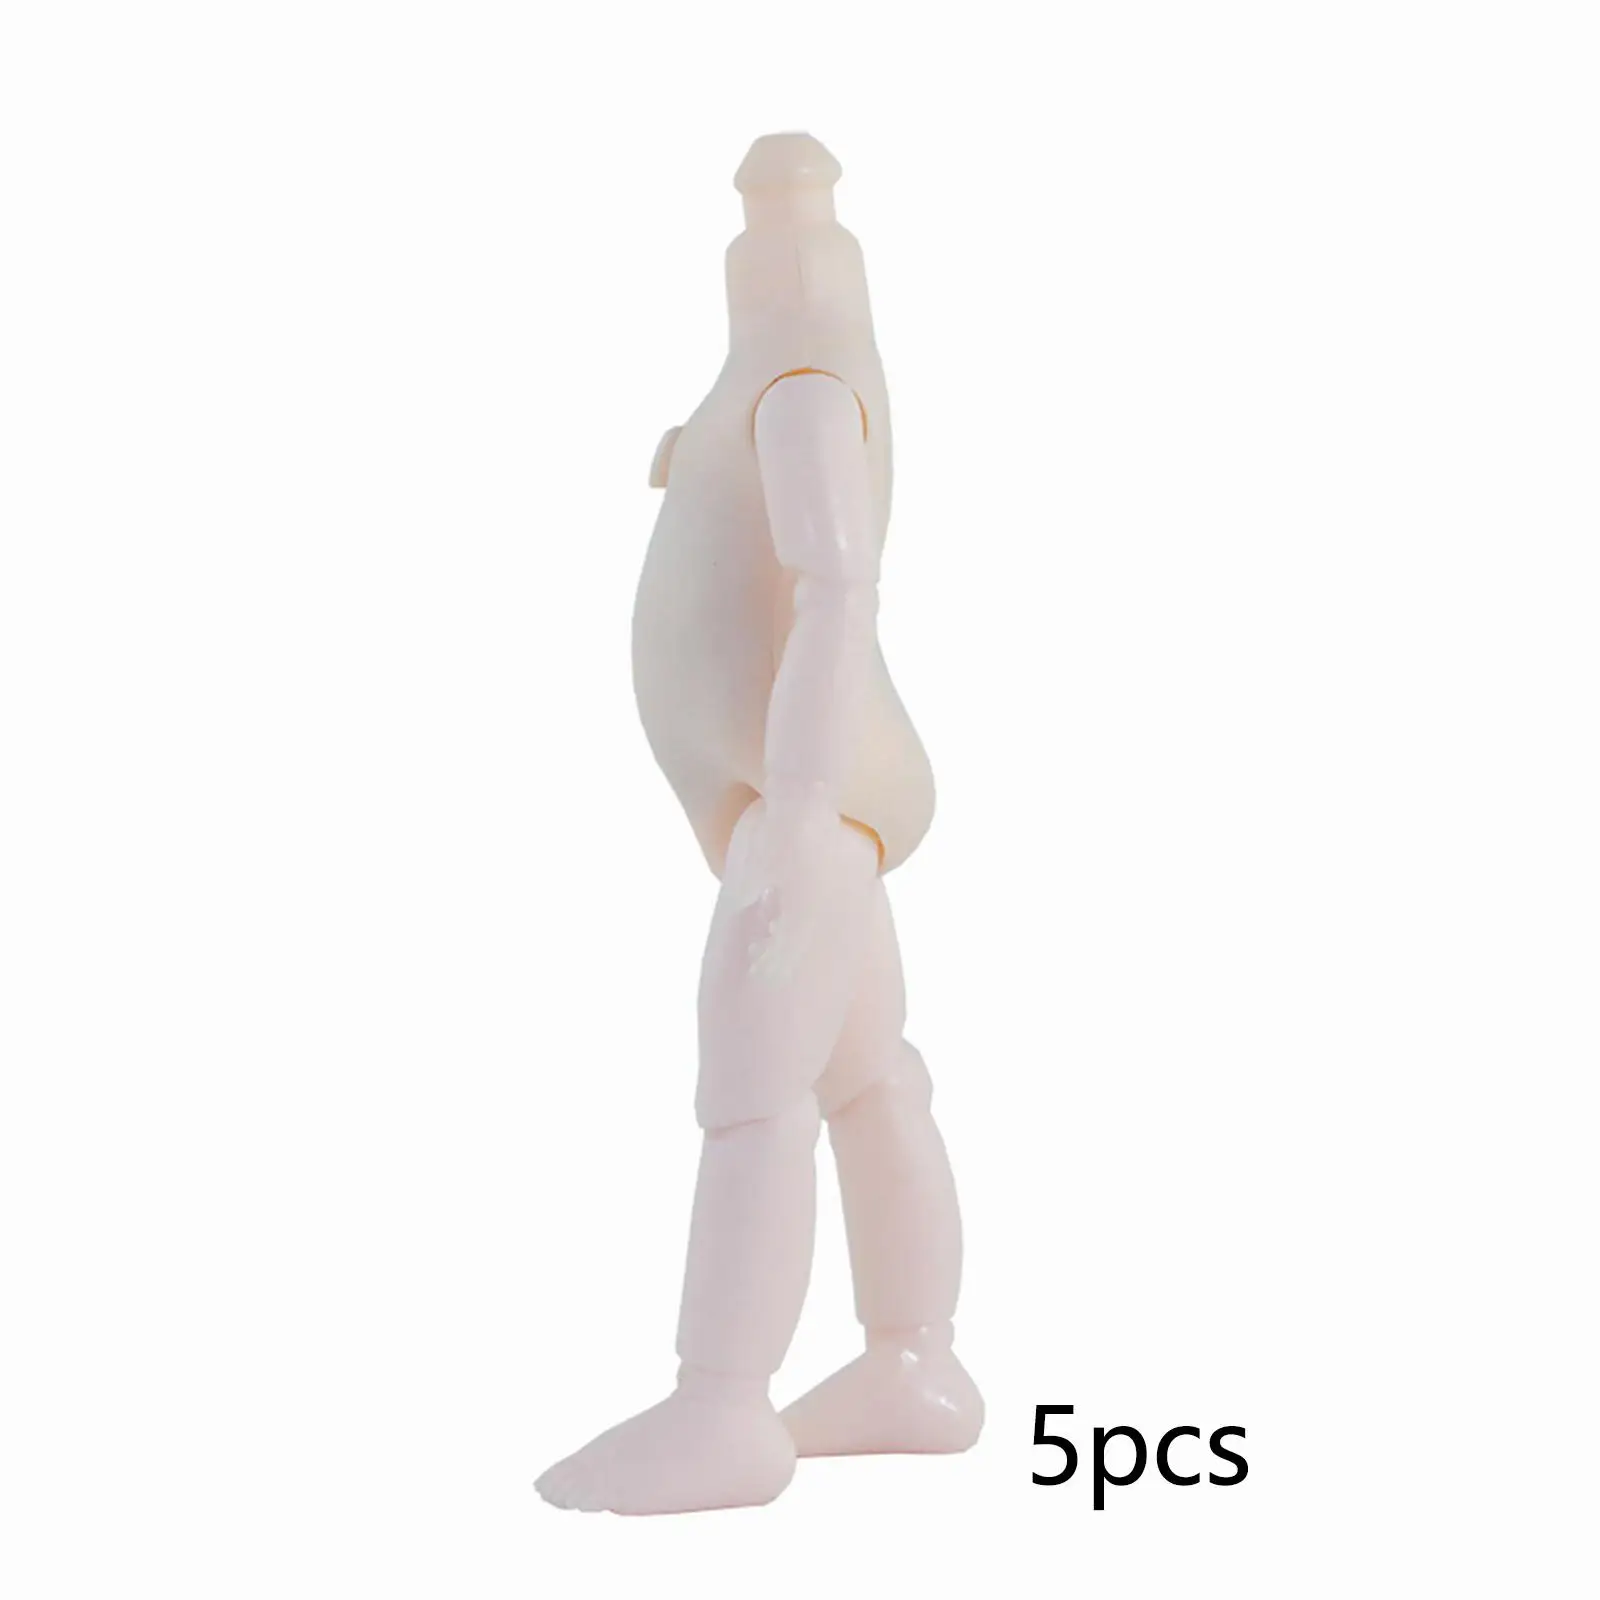 5Pcs Doll Nude Body 6.3inch 13 Joints Movable DIY Making Accessories No Head